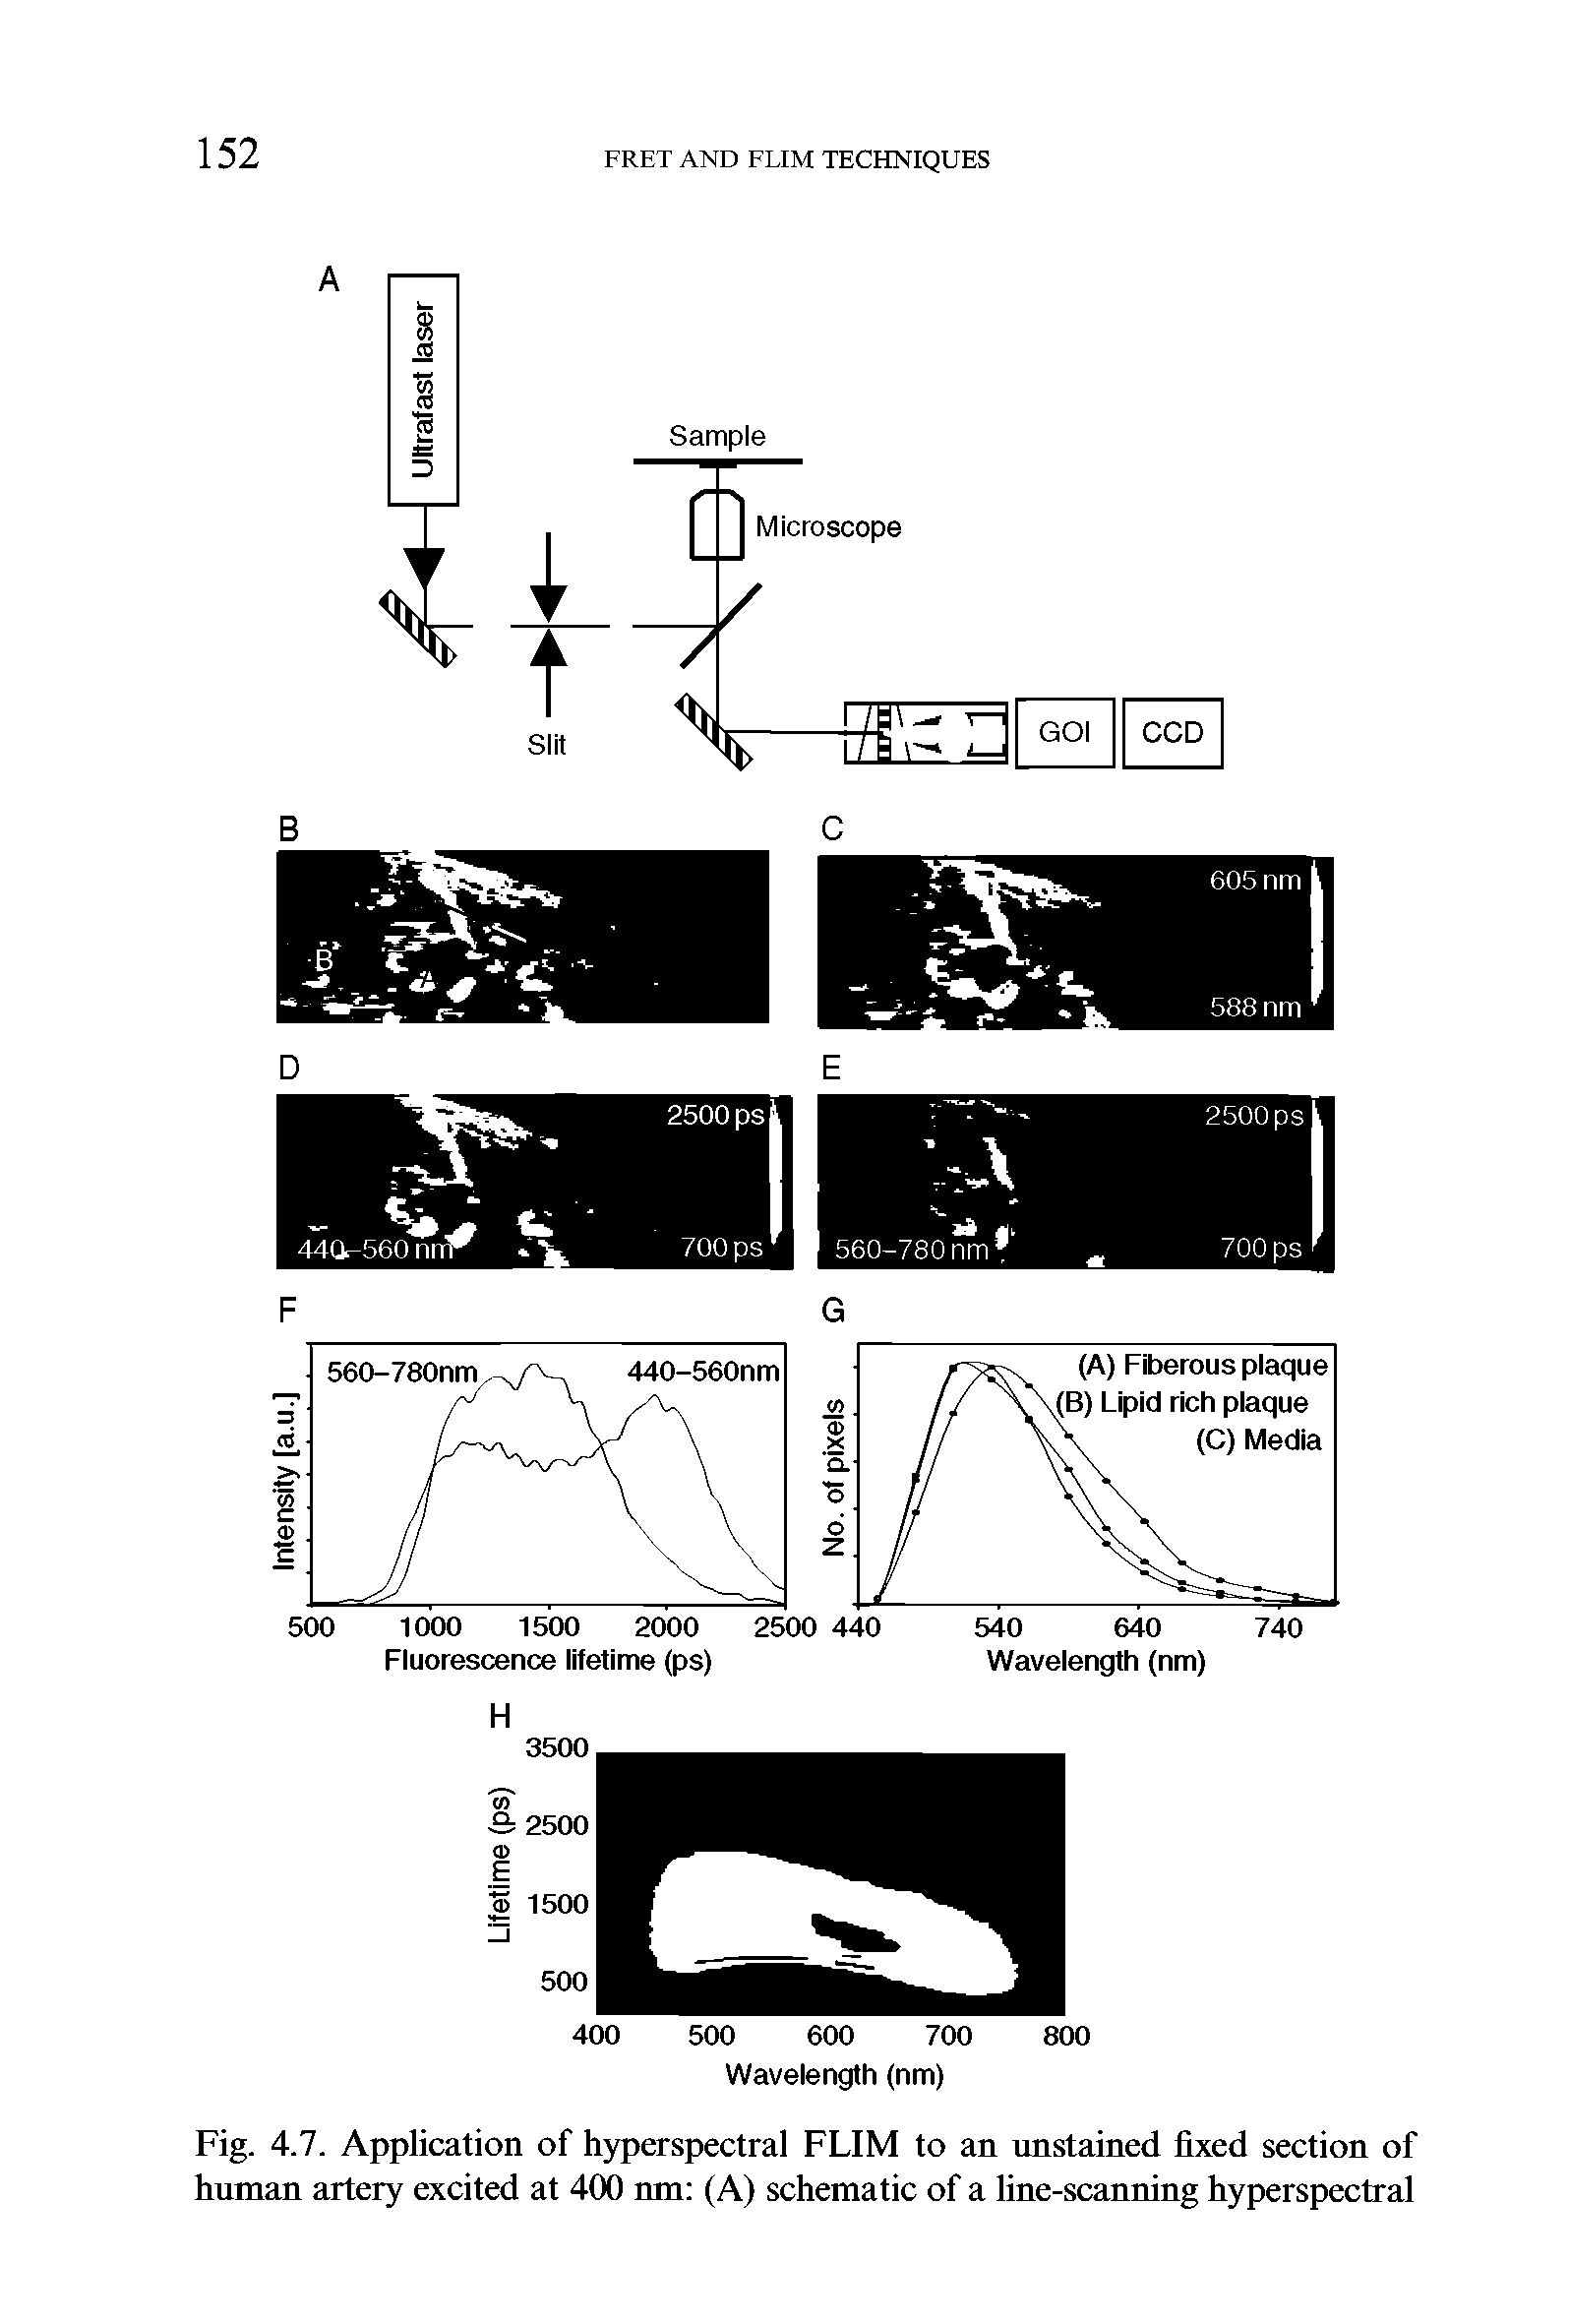 Fig. 4.7. Application of hyperspectral FLIM to an unstained fixed section of human artery excited at 400 nm (A) schematic of a line-scanning hyperspectral...